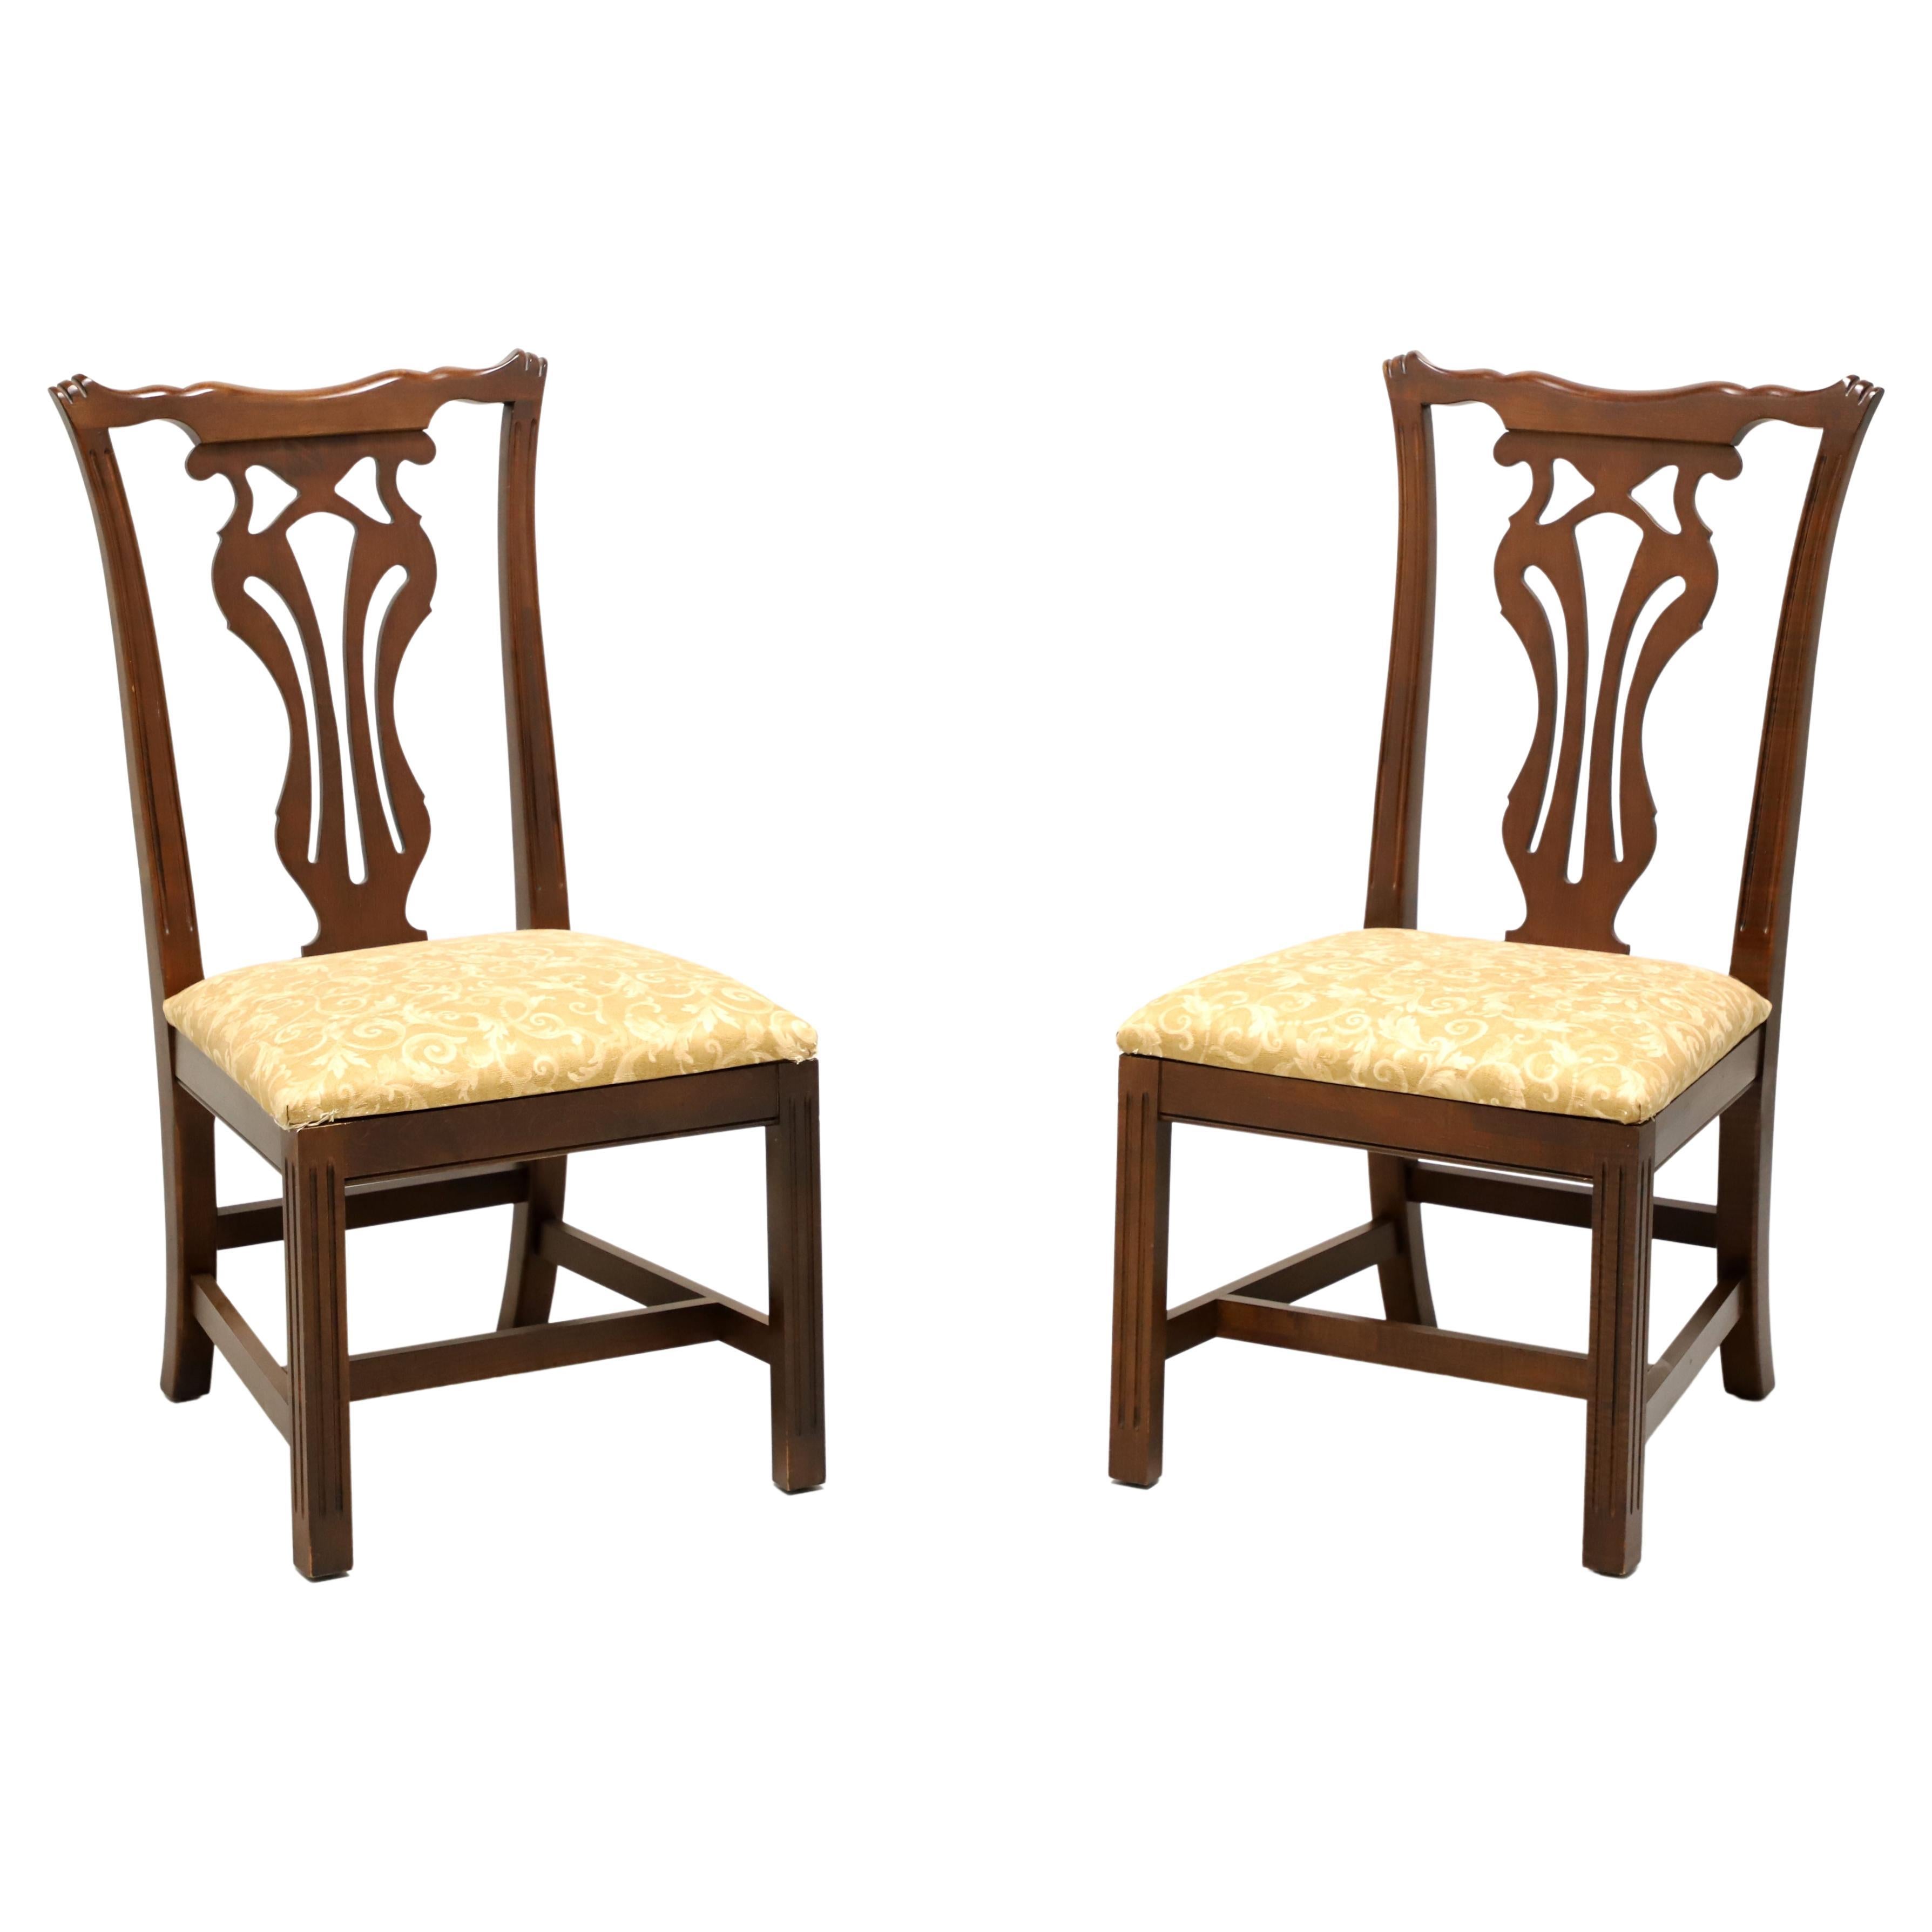 KNOB CREEK Mahogany Chippendale Dining Side Chairs - Pair B For Sale